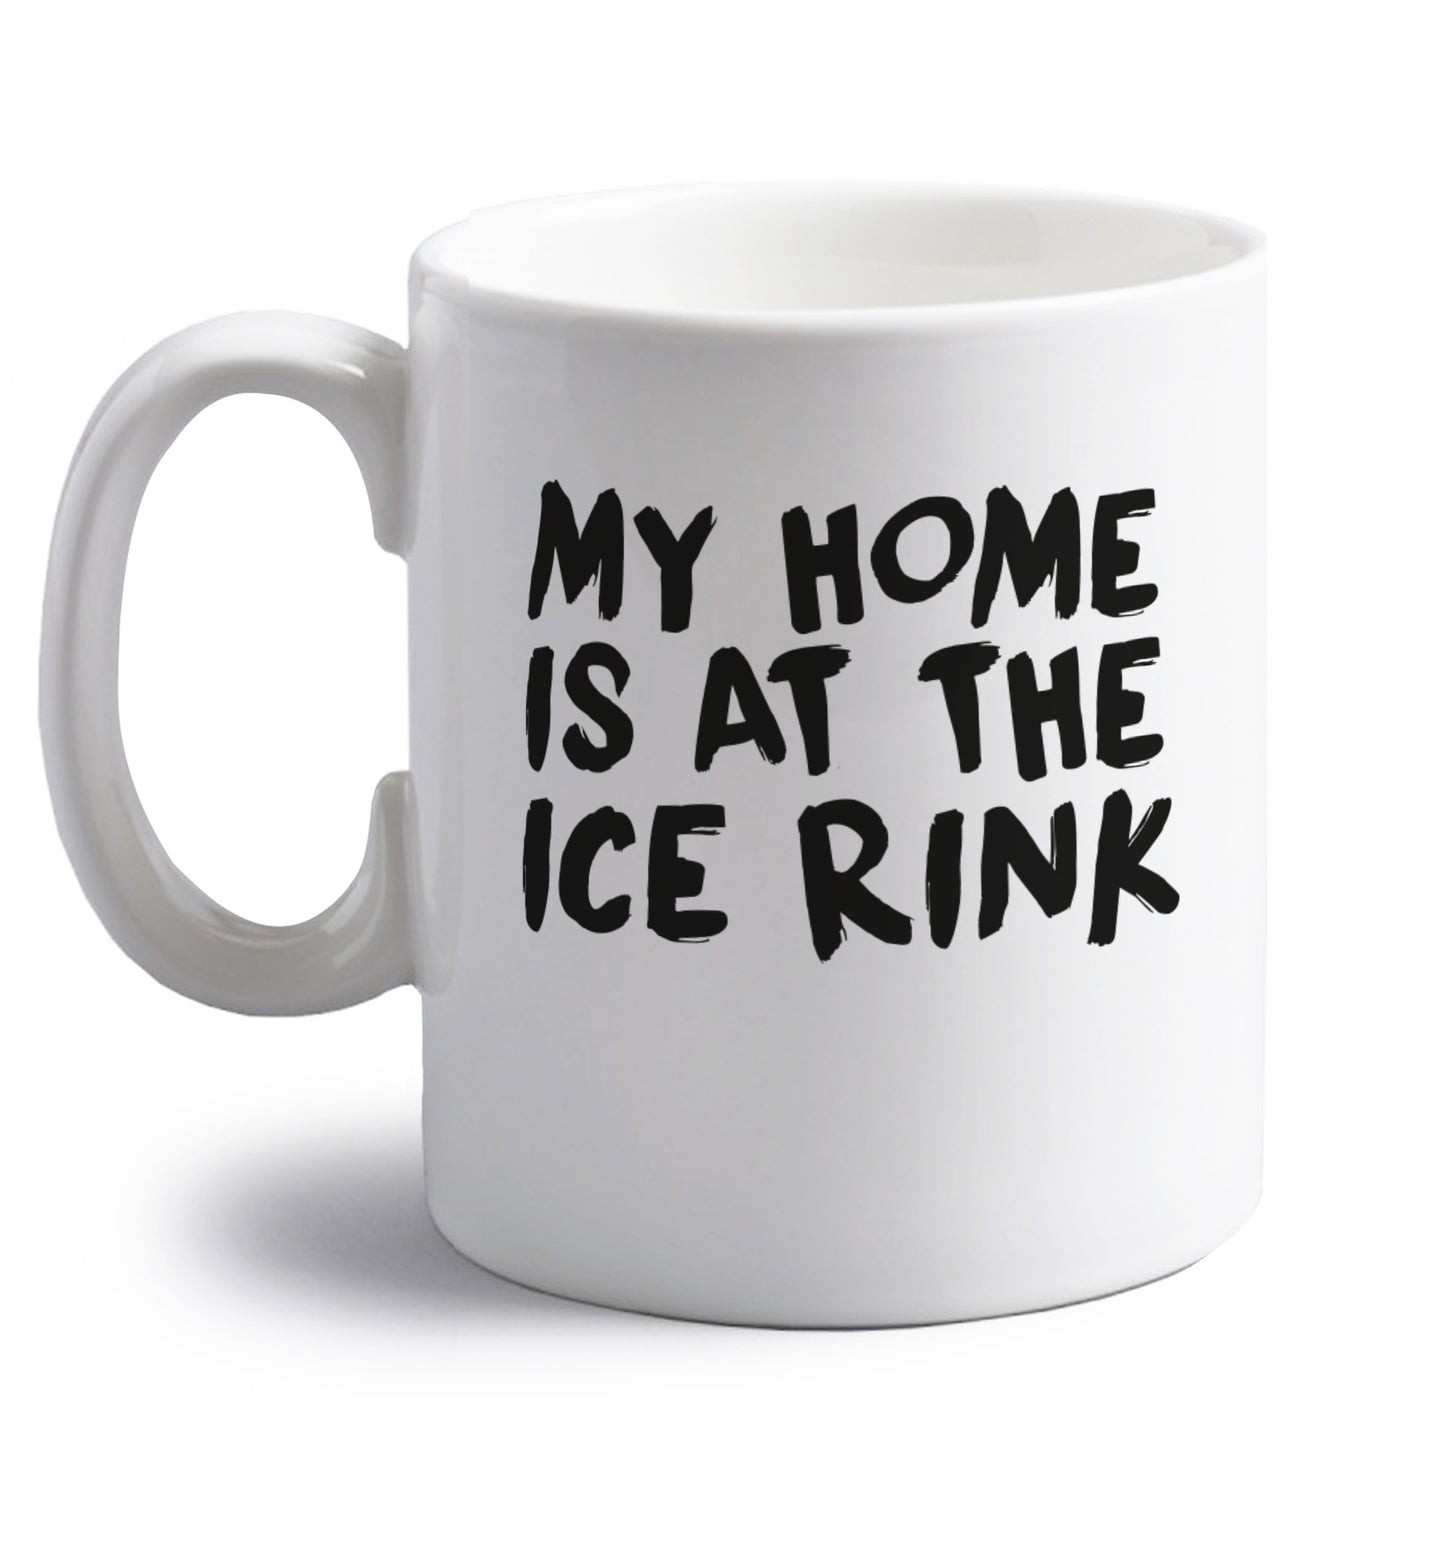 My home is at the ice rink right handed white ceramic mug 